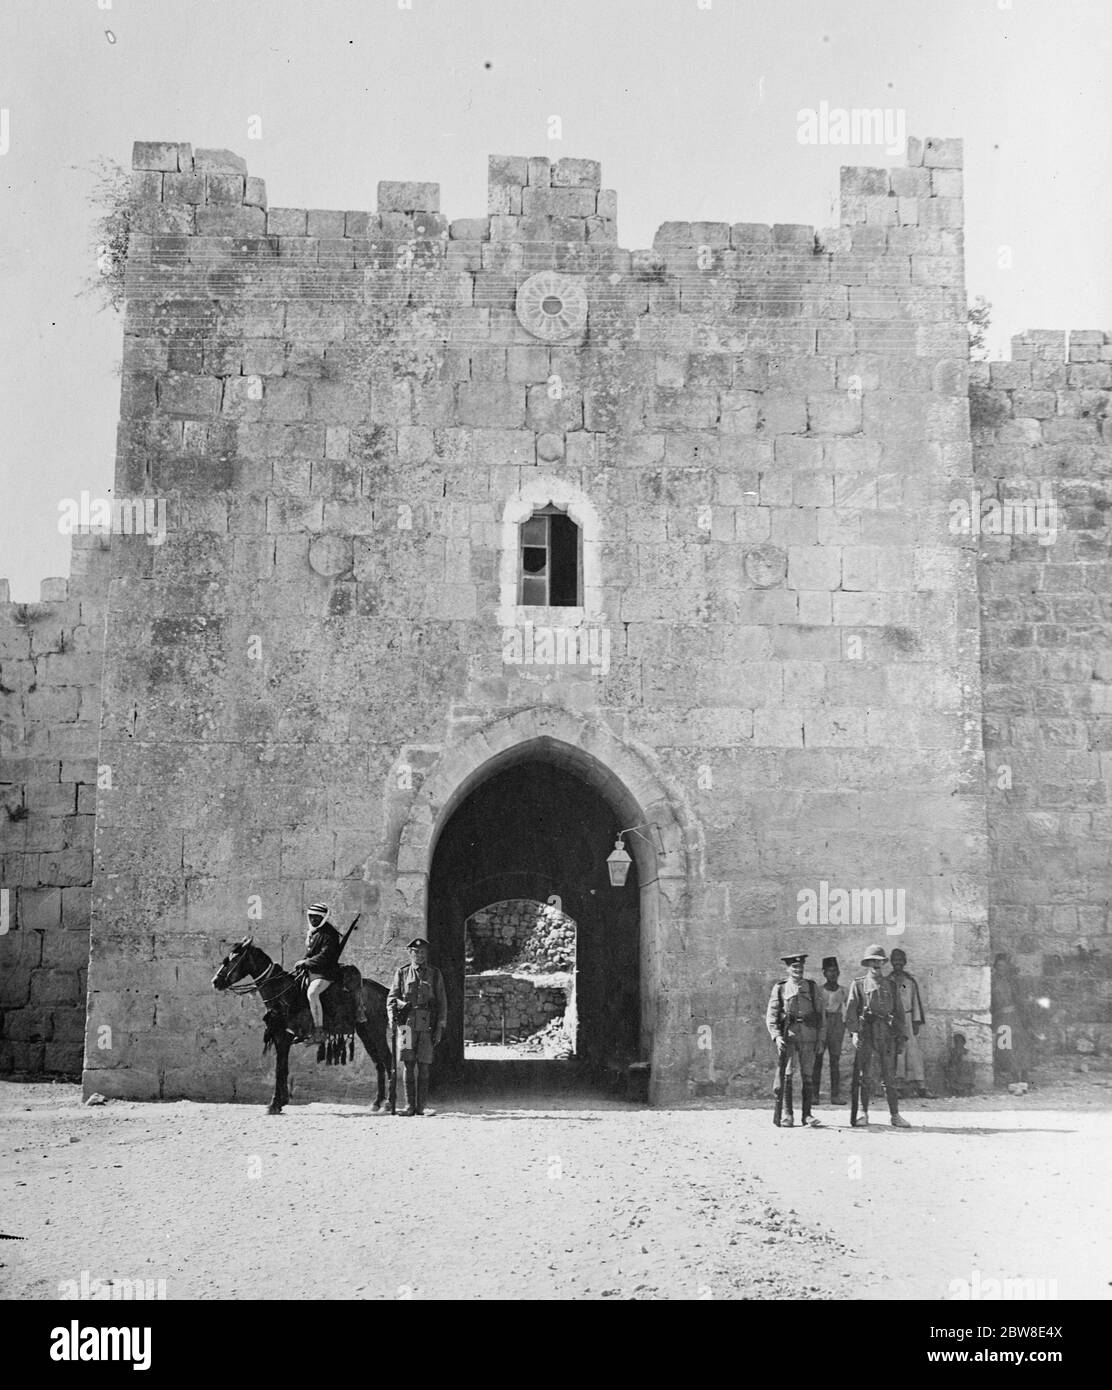 The outbreak in Jerusalem - Jewish barrister and friend shot at Herod ' s Gate . Herod ' s Gate , where ( as described by a woman correspondent of the ' Evening News ' , London ) the shooting took place of Harold Wigner , a Jewish barrister and philanthropist who was shot along with his Jewish friend . 28 August 1929 Stock Photo